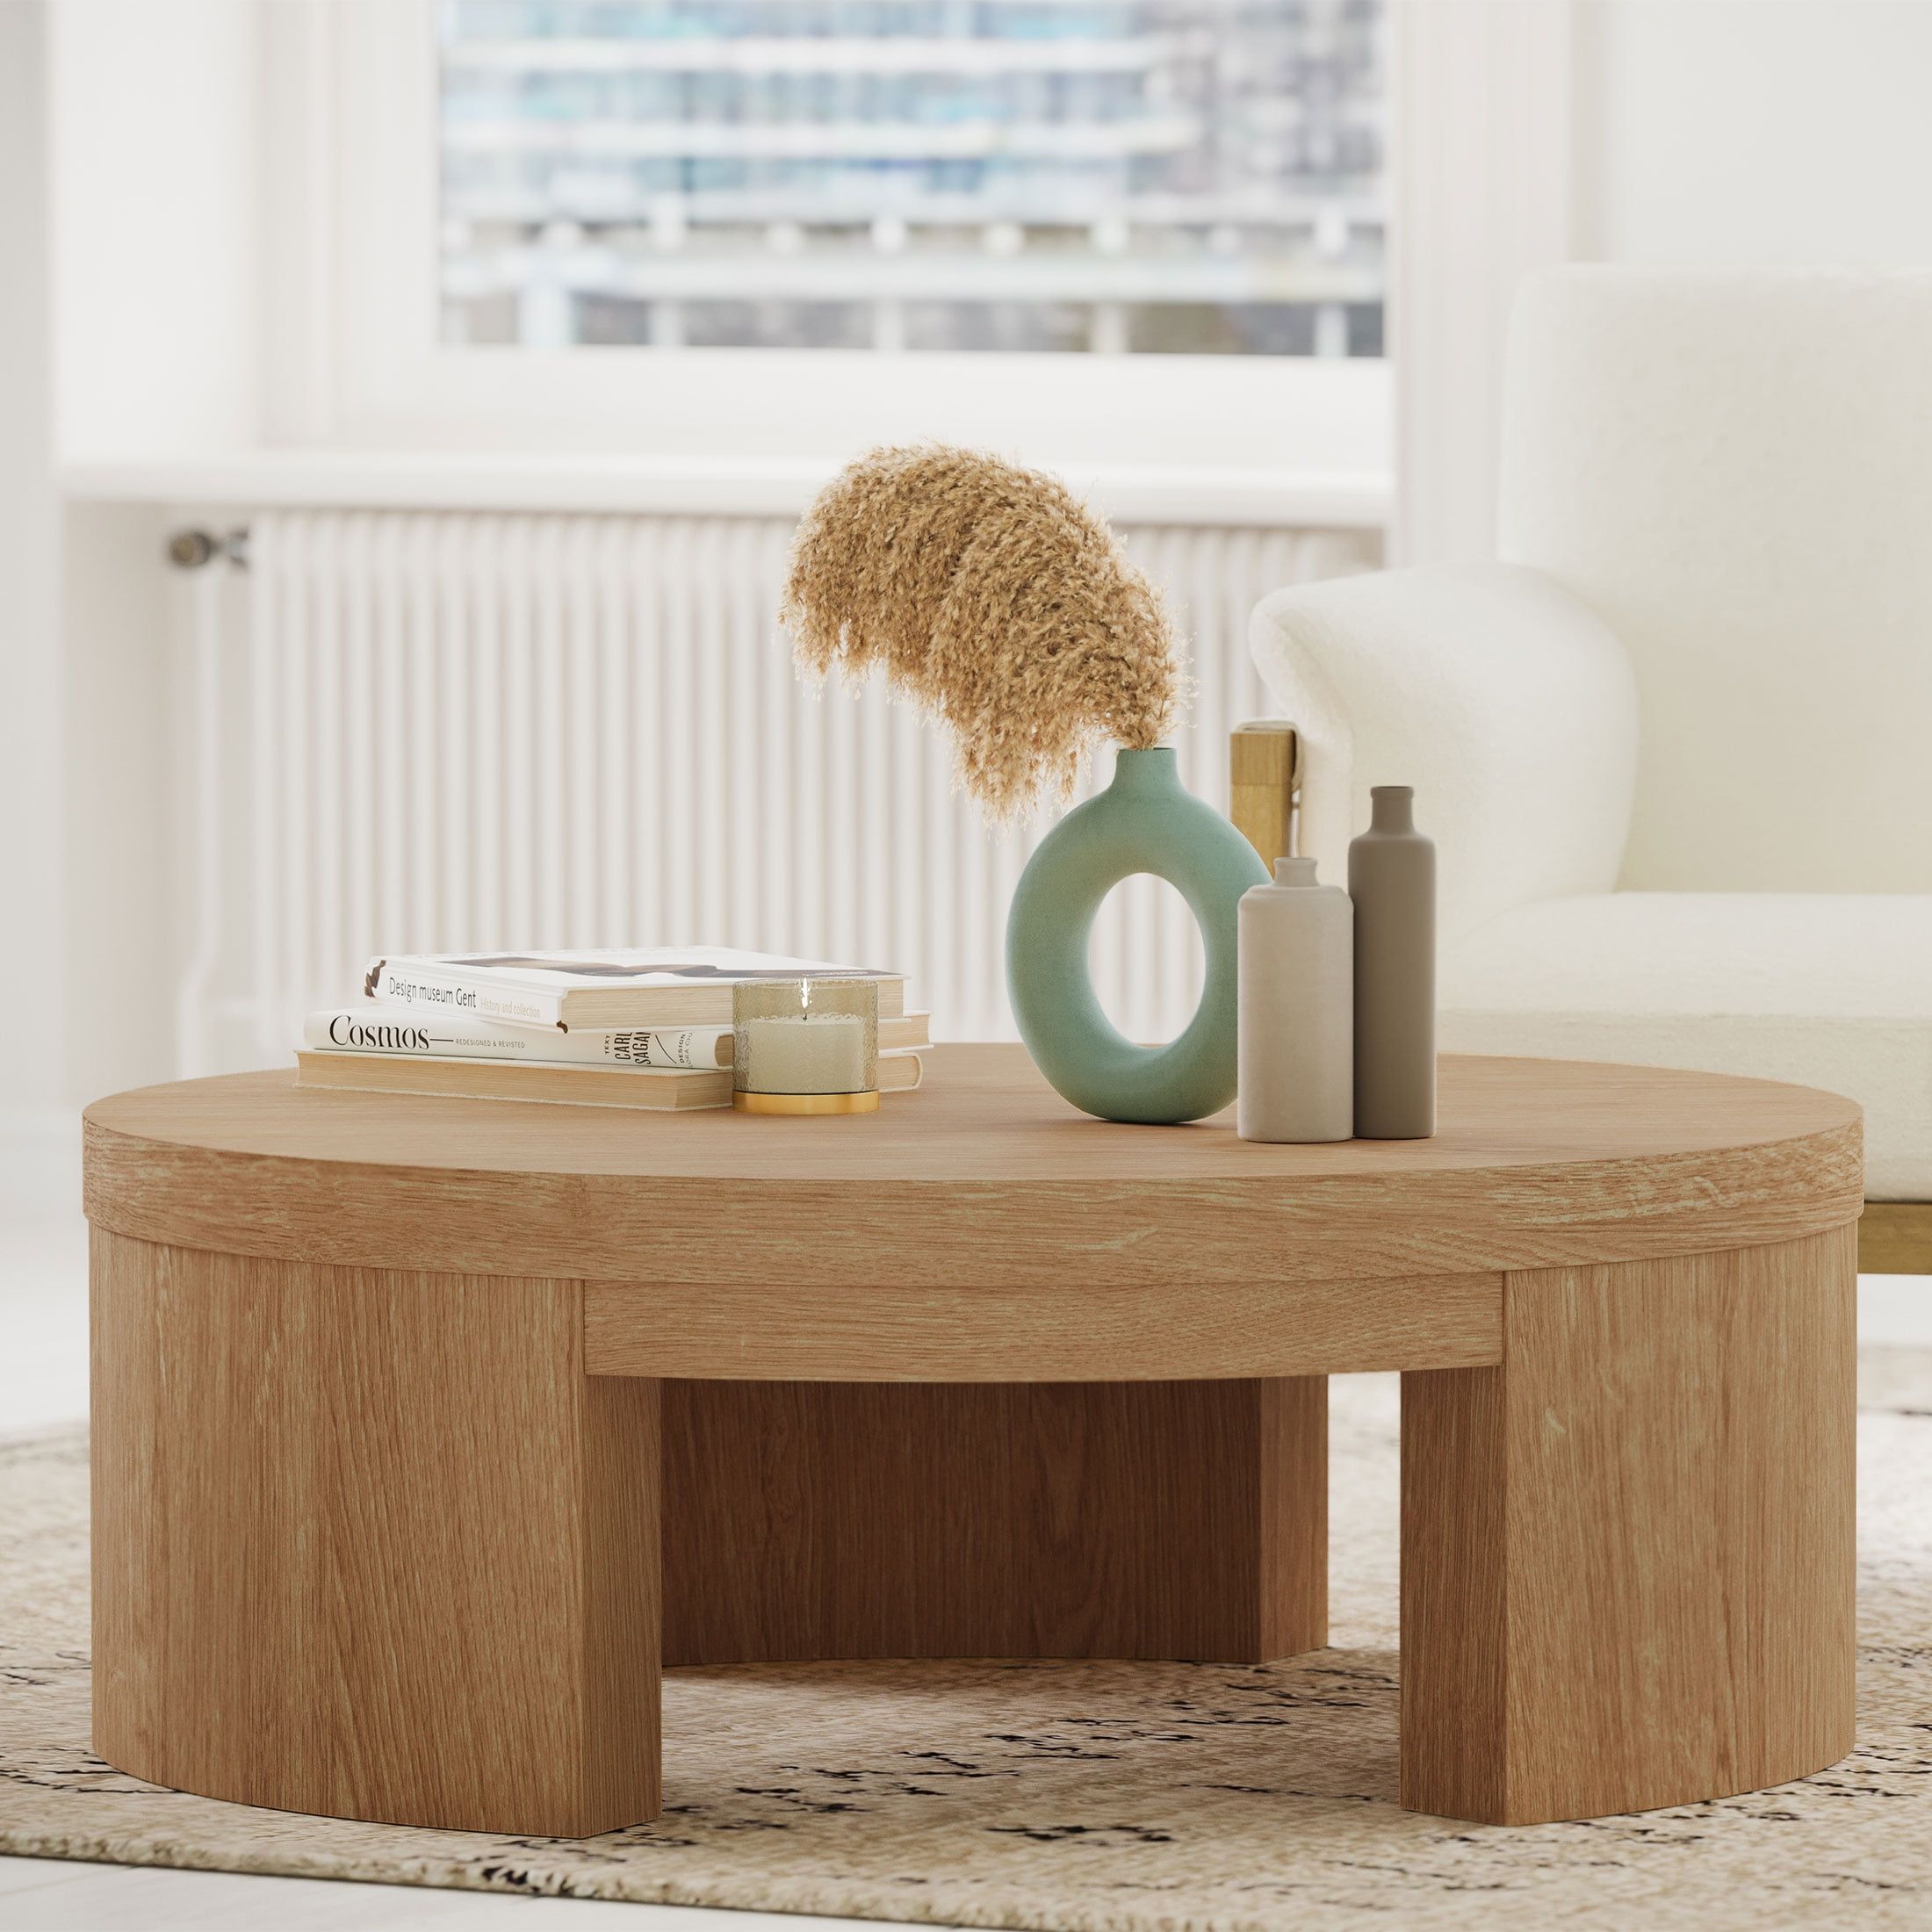 Beautiful Mod Round Coffee Tabledrew Barrymore, Warm Honey Finish –  Walmart In Modern Wooden X Design Coffee Tables (View 13 of 15)